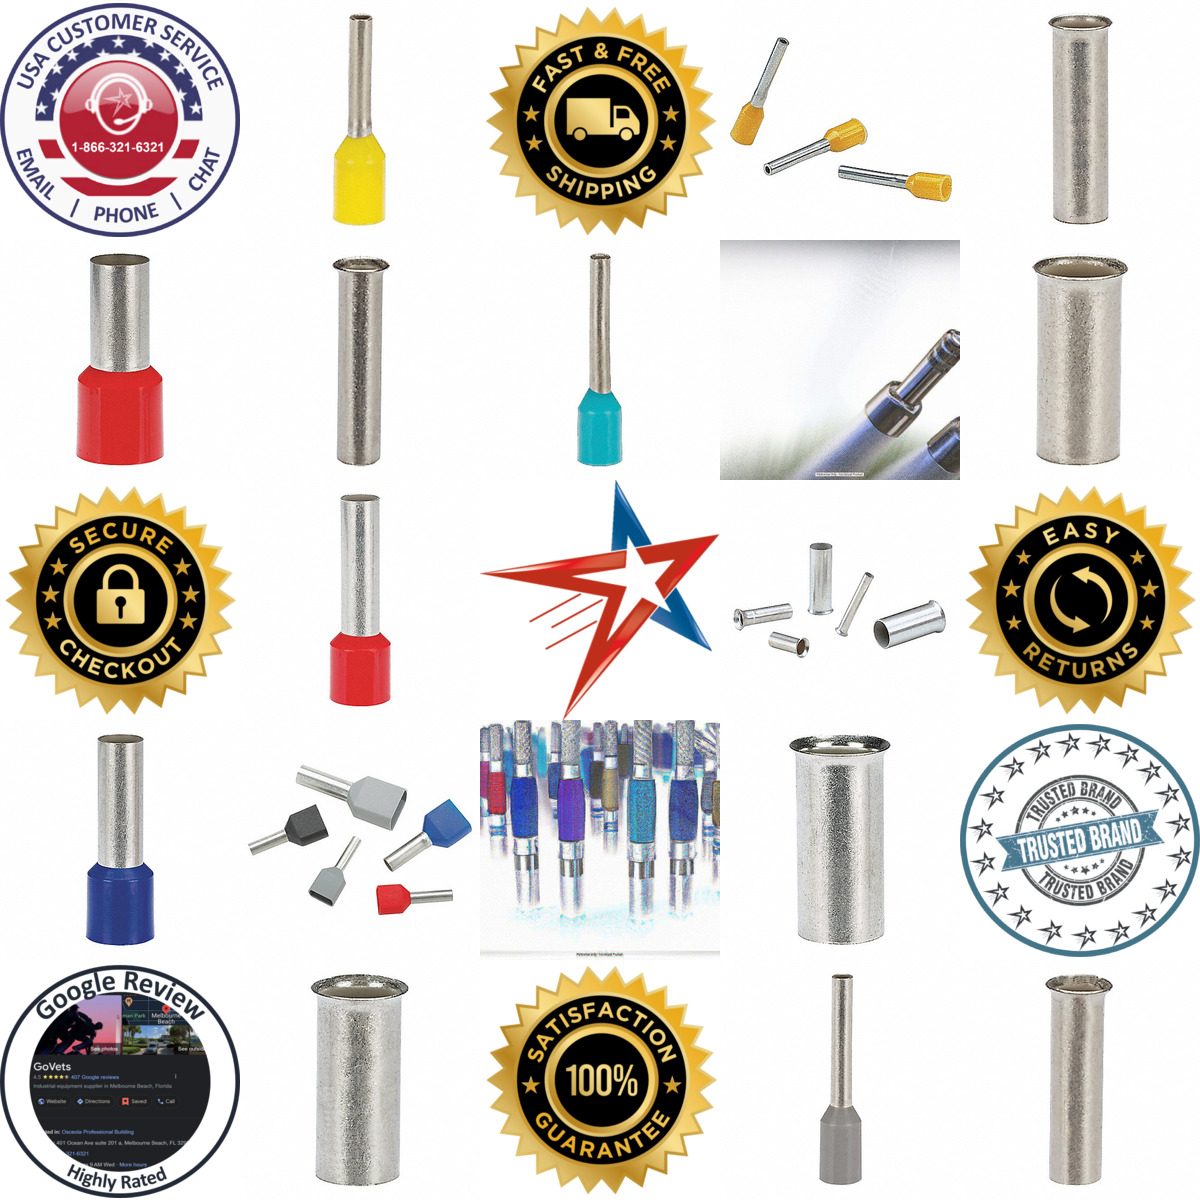 A selection of Wire Ferrules products on GoVets